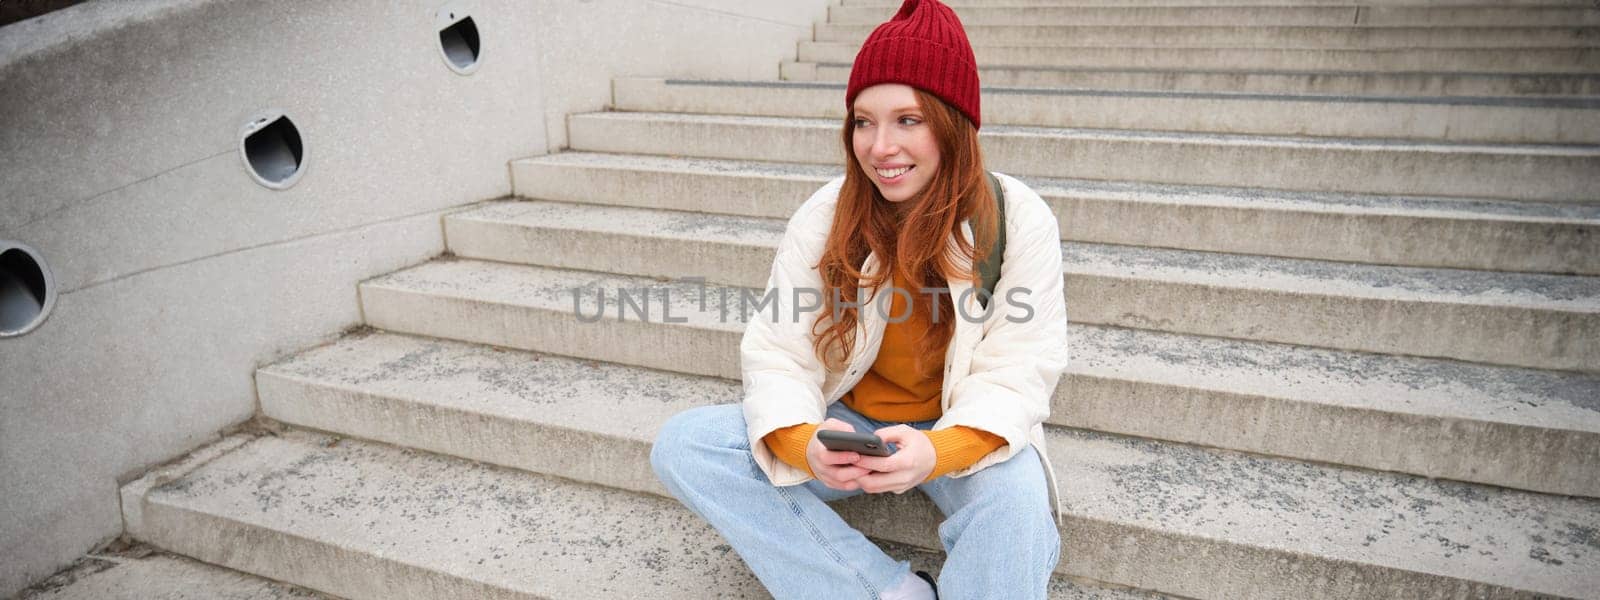 Hipster ginger girl, redhead woman sits on stairs with smartphone, waits for someone and messages on social media on mobile phone app. People and technology concept